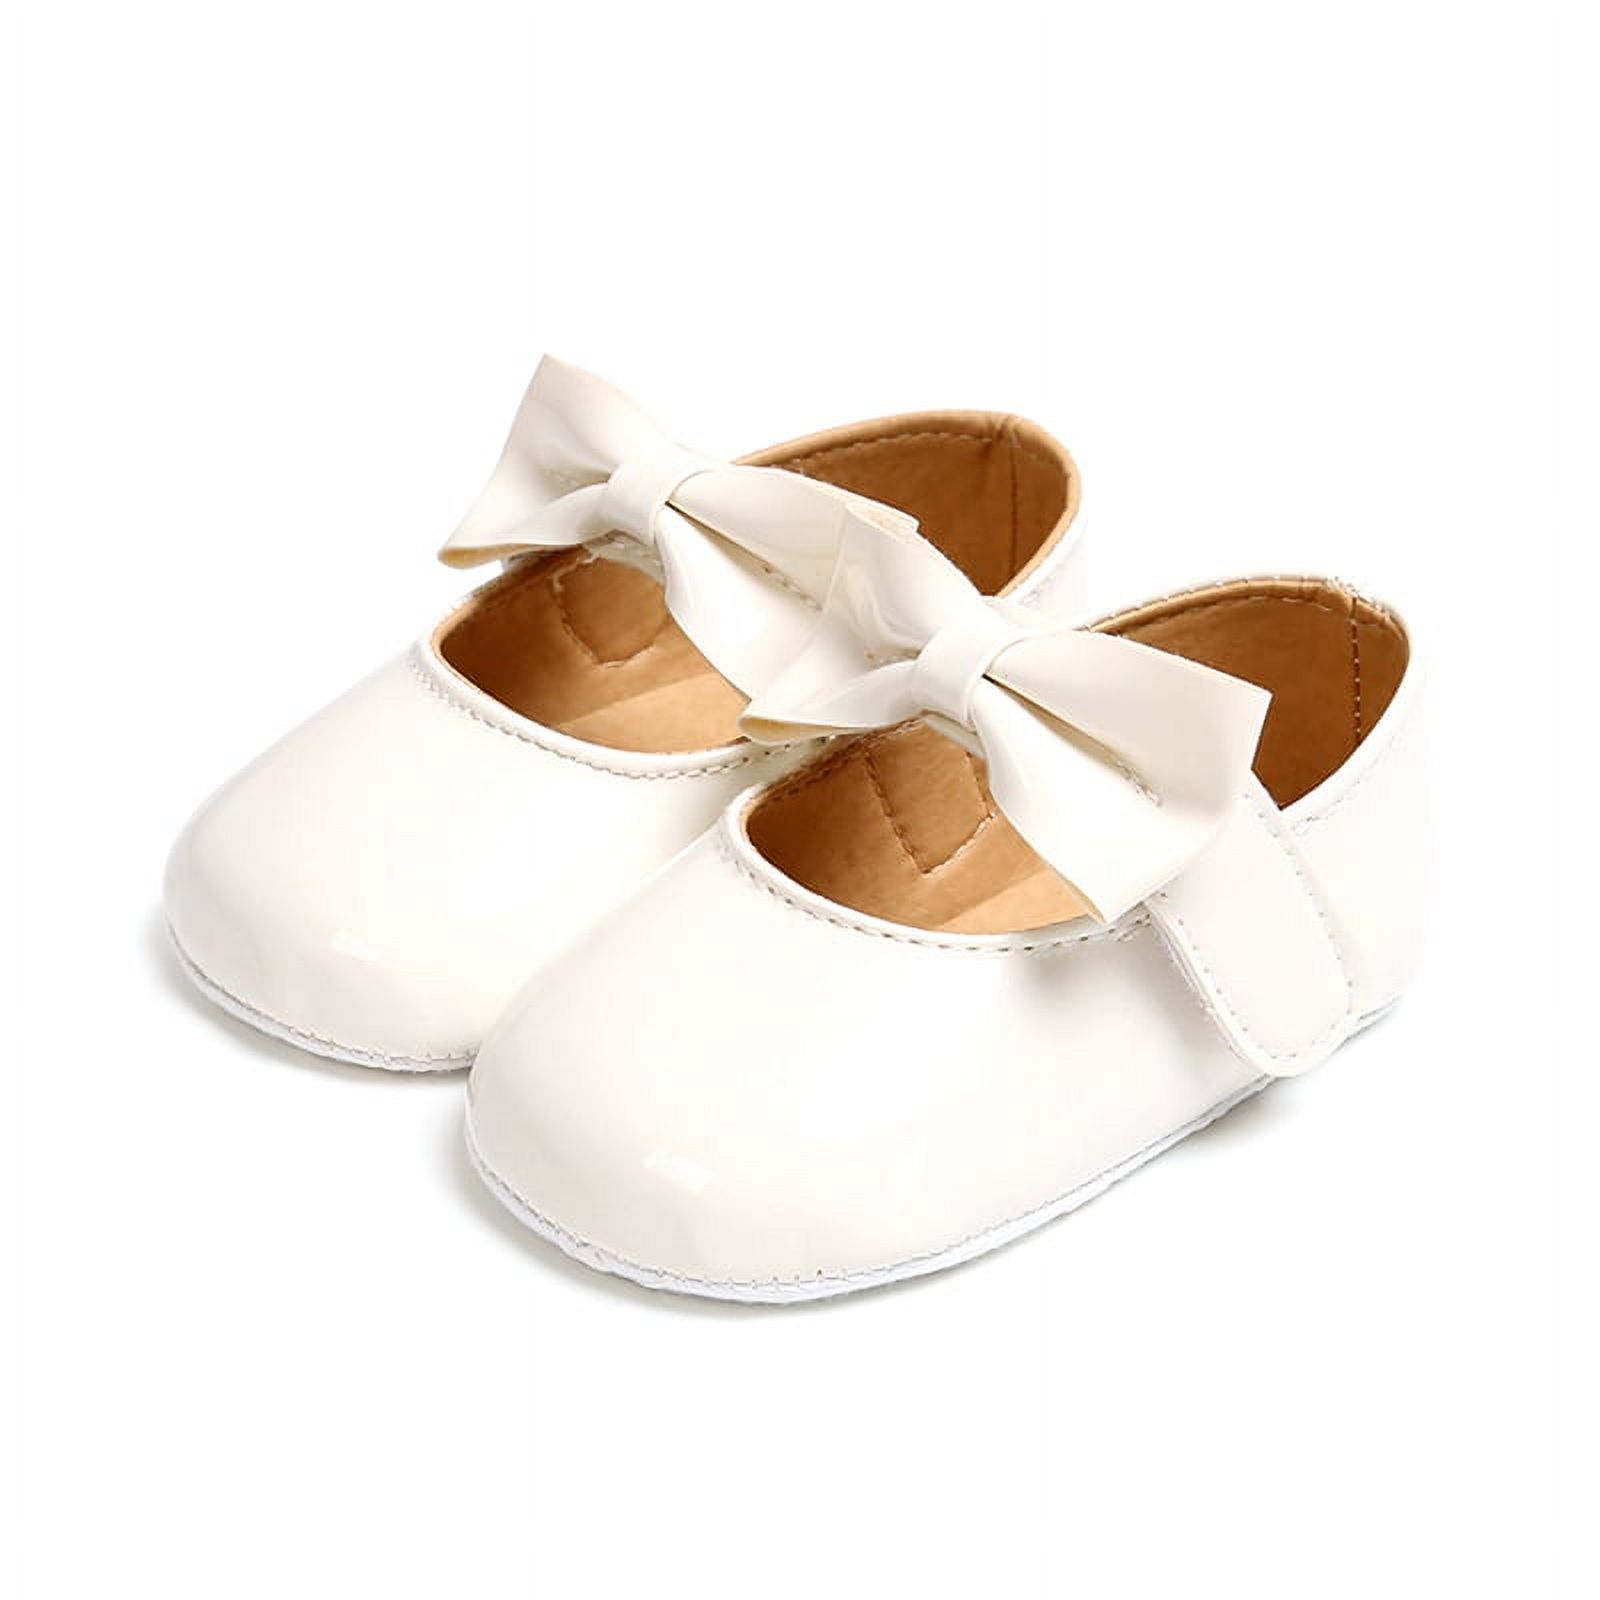 Infant Toddler Baby Girl's Soft Sole Anti-Slip Casual Shoes PU Leather Bowknot Princess Shoes - image 1 of 7